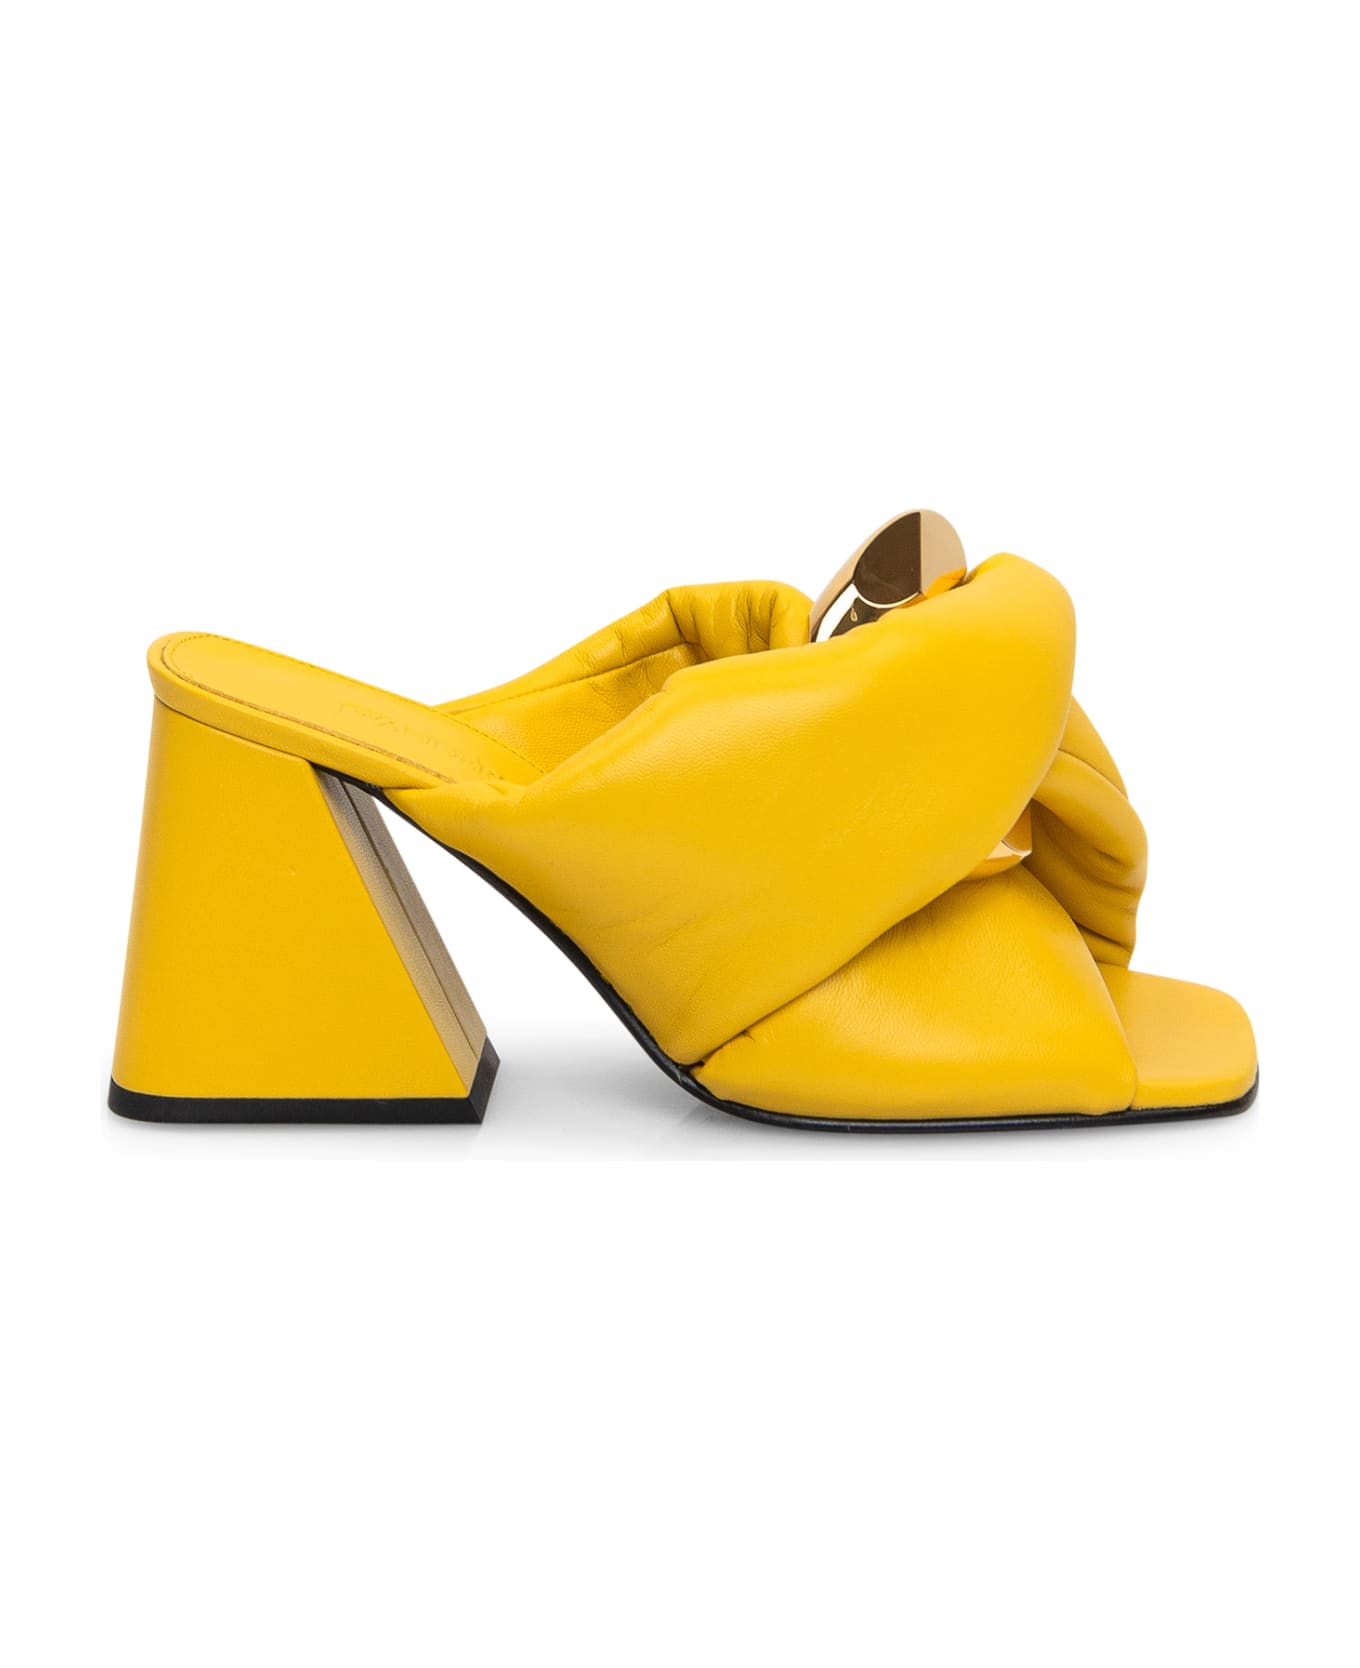 J.W. Anderson Twisted Sandal - YELLOW